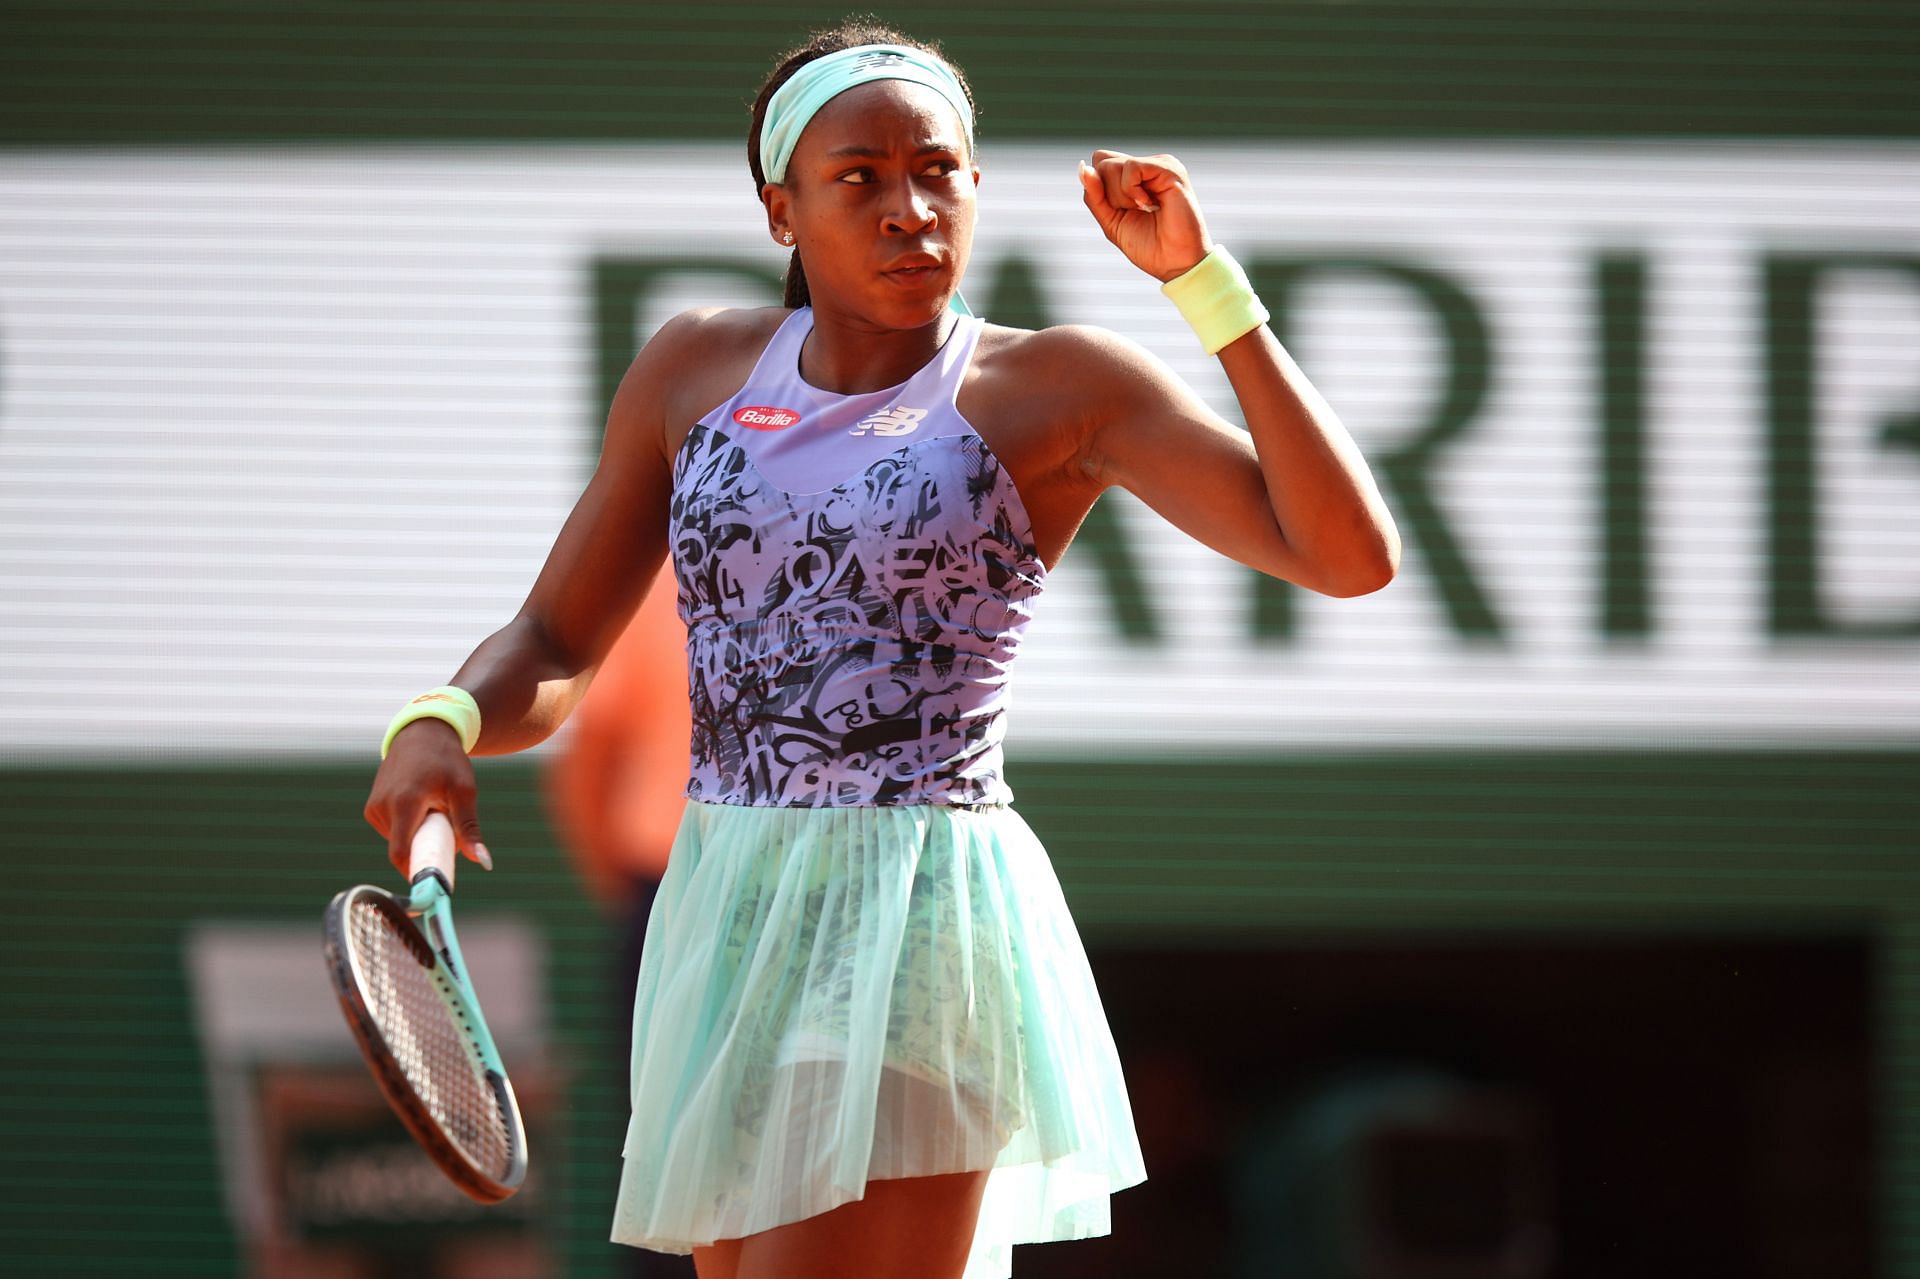 Coco Gauff reached her maiden Grand Slam final at the French Open on Thursday